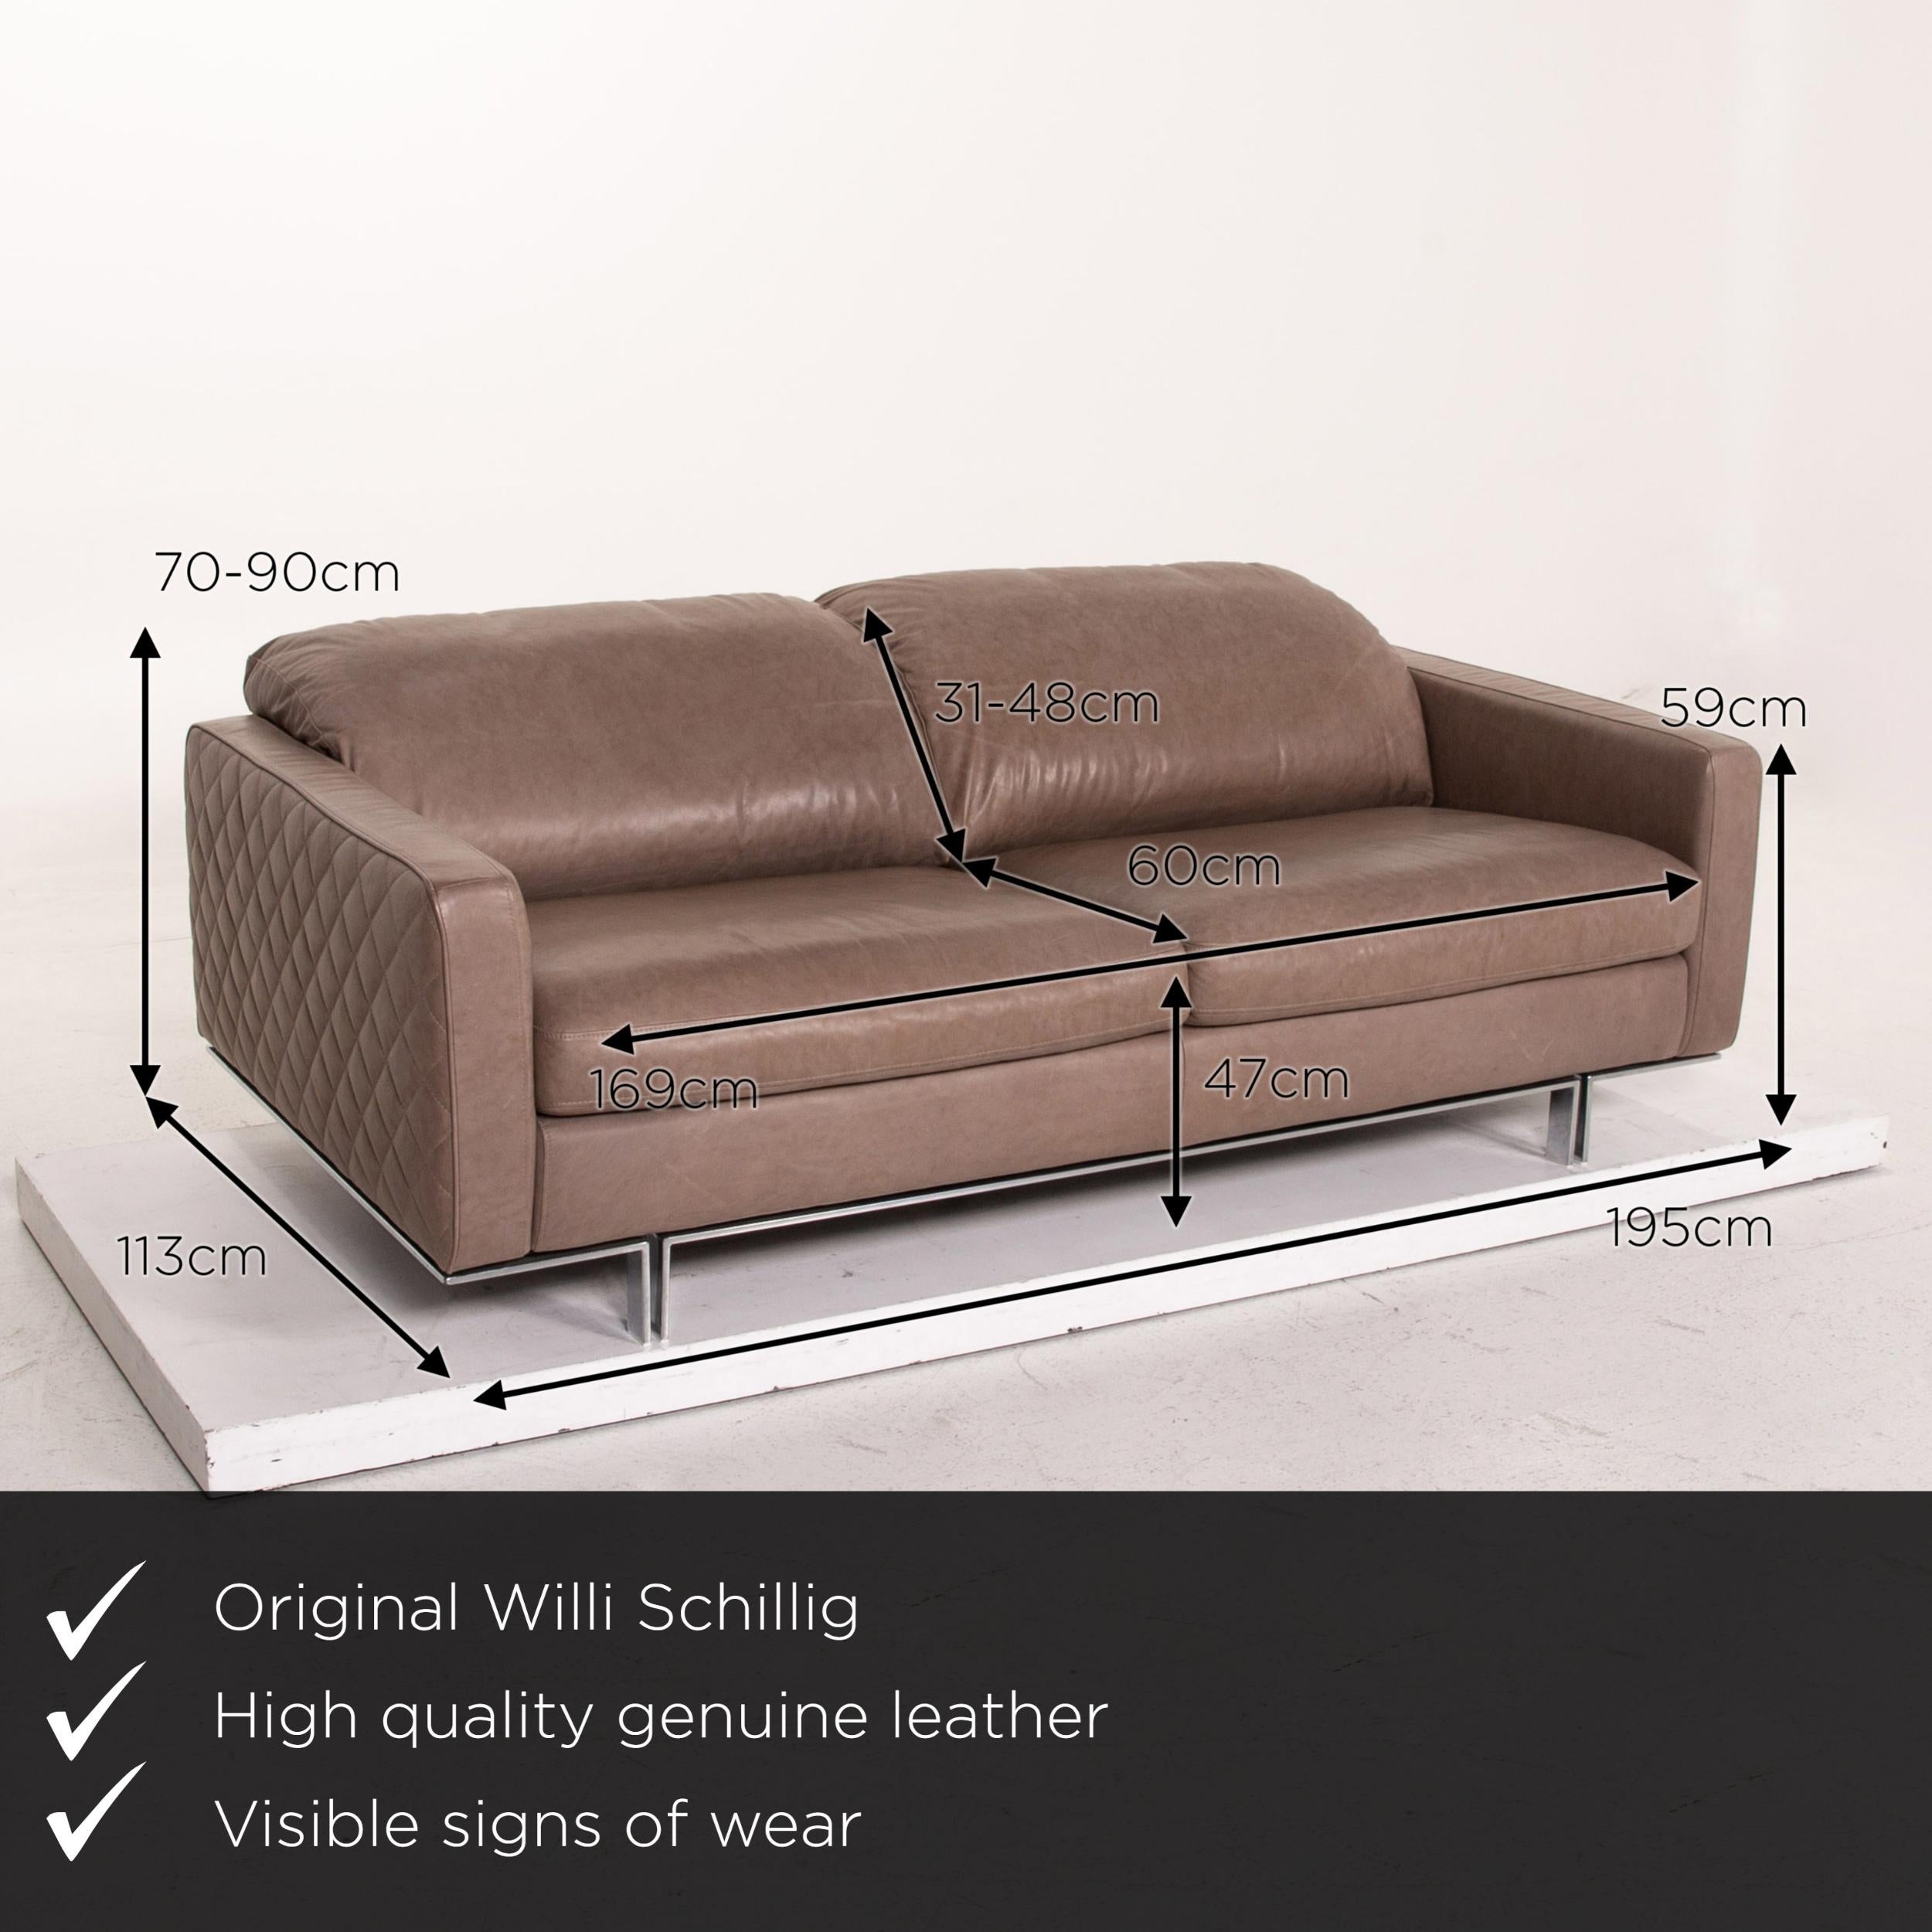 We present to you a Willi Schillig leather sofa gray beige two-seat couch.

Product measurements in centimeters:

Depth 113
Width 195
Height 70
Seat height 47
Rest height 59
Seat depth 60
Seat width 169
Back height 31.
 
 
  